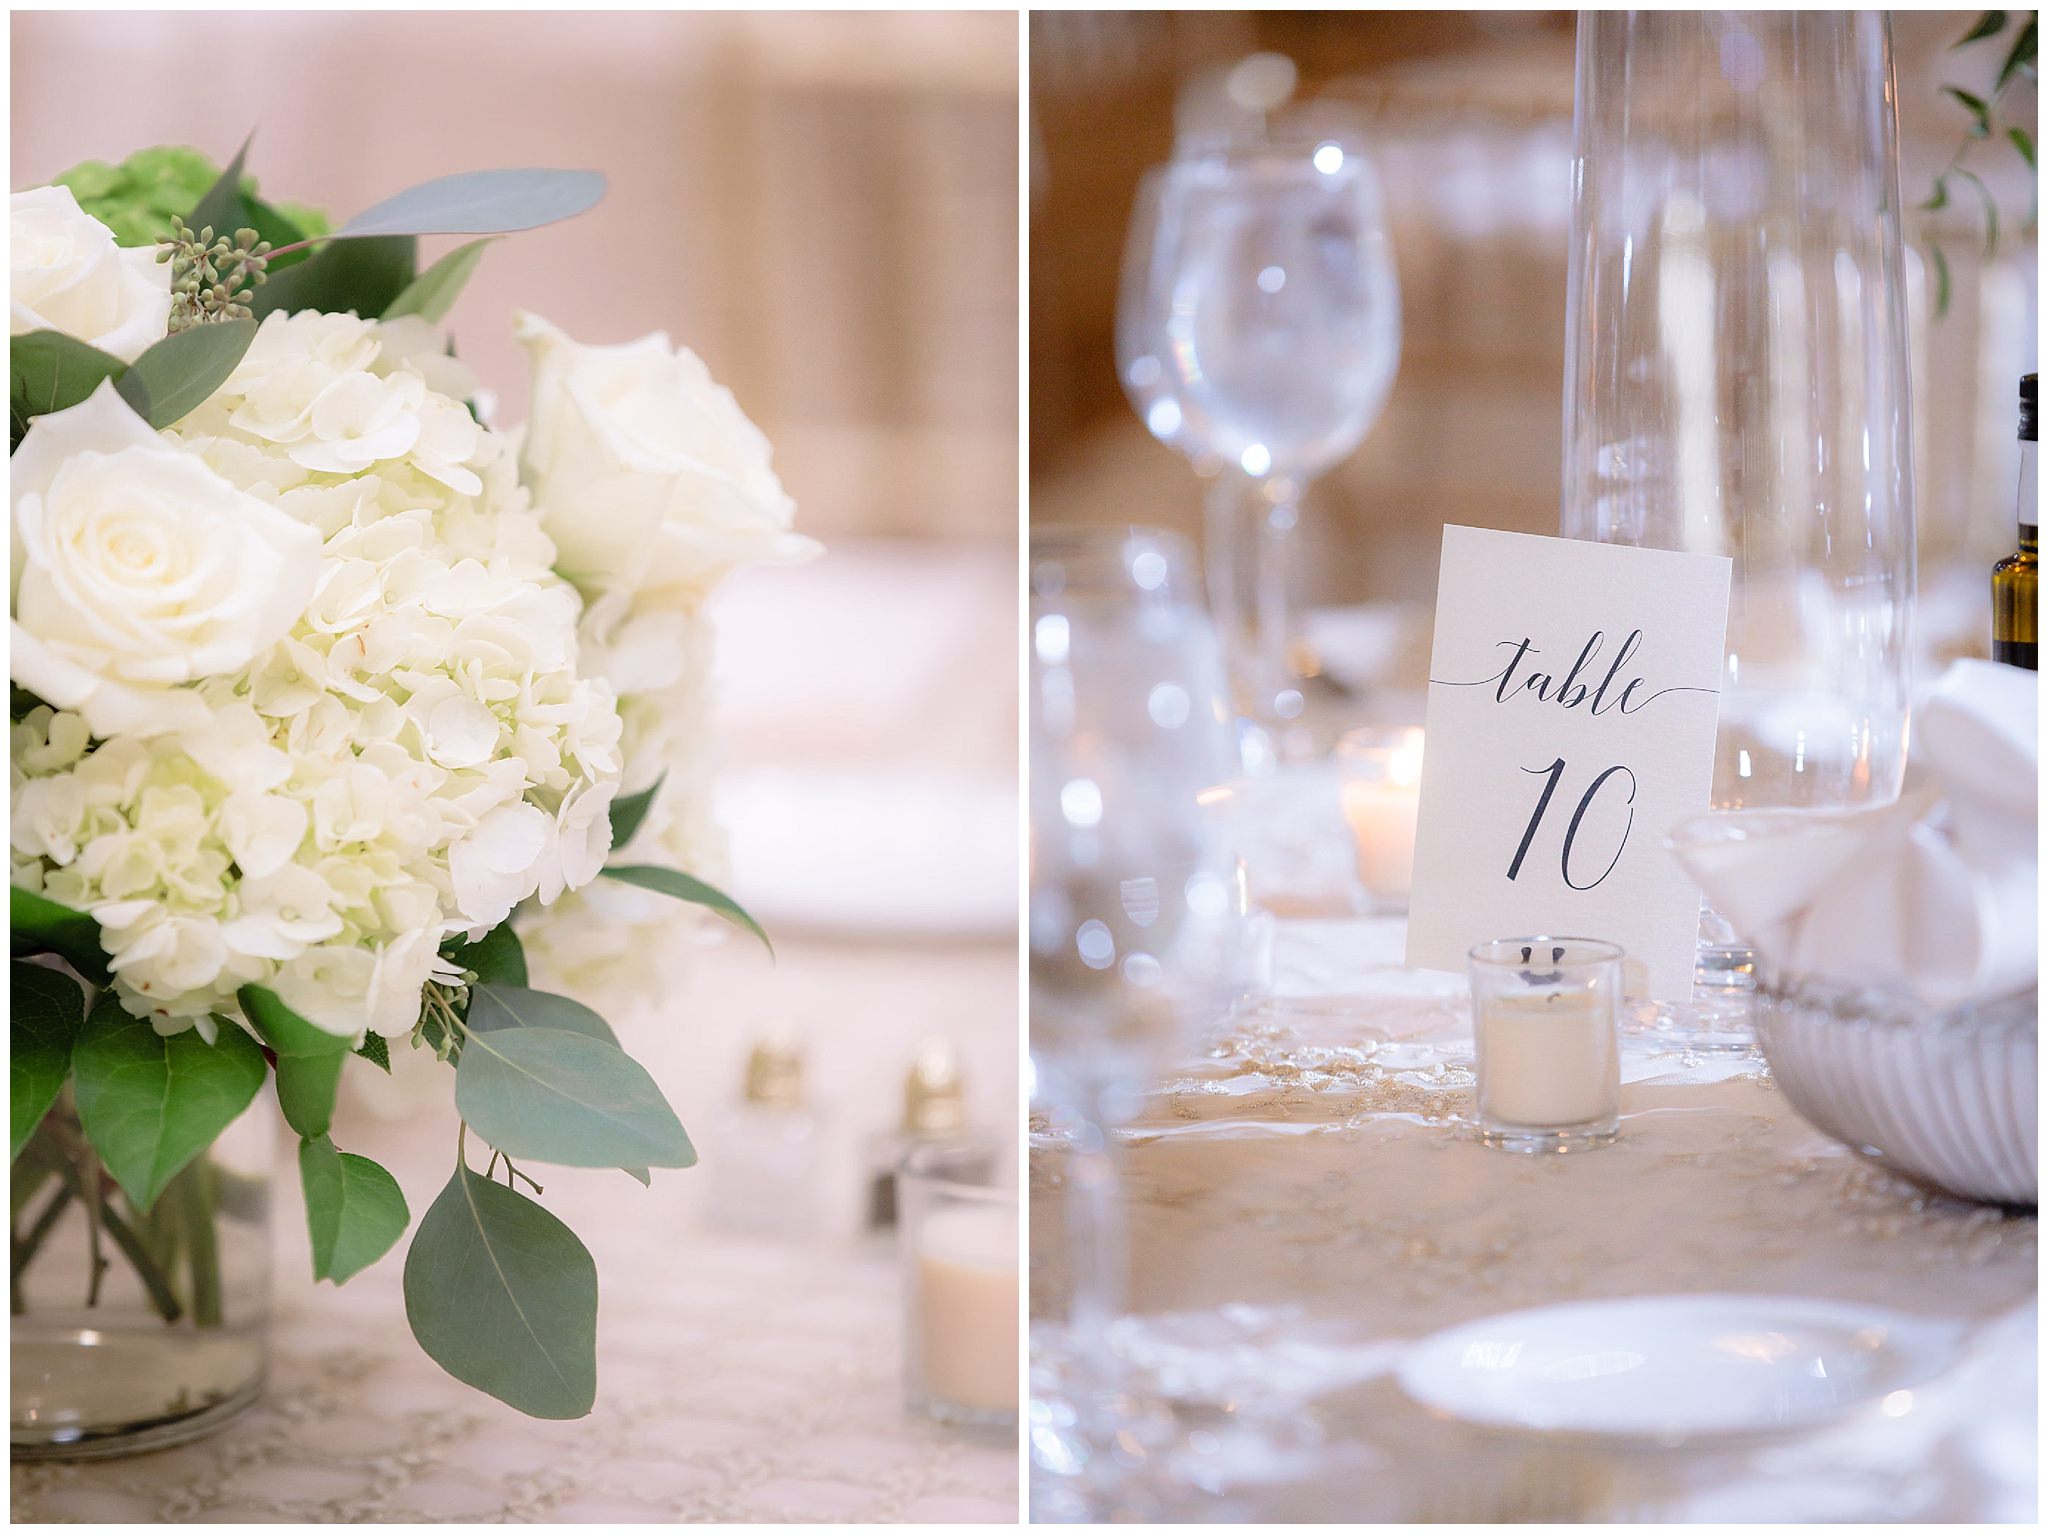 Calligraphy table numbers and floral centerpieces at a Soldiers & Sailors wedding